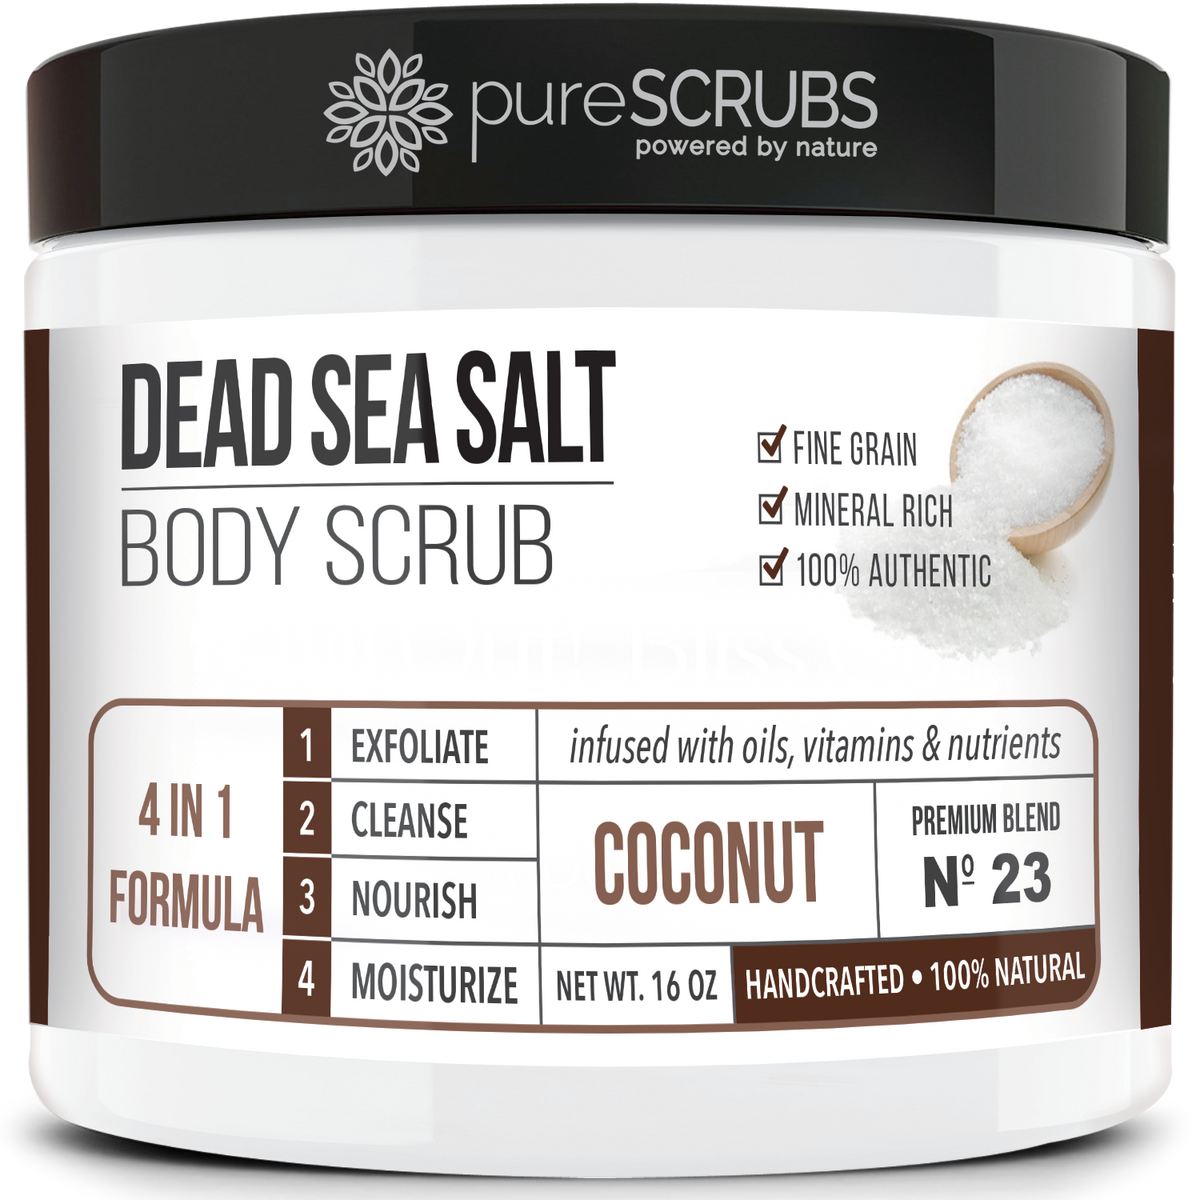 purescrubs coconut dead sea salt body scrub Premium Blend #23 to exfoliate your skin comes with free loofah pad free exfoliating organic oatmeal bar soap shea butter and honey and free eco-friendly bamboo spoon to stir and scoop out the scrub 